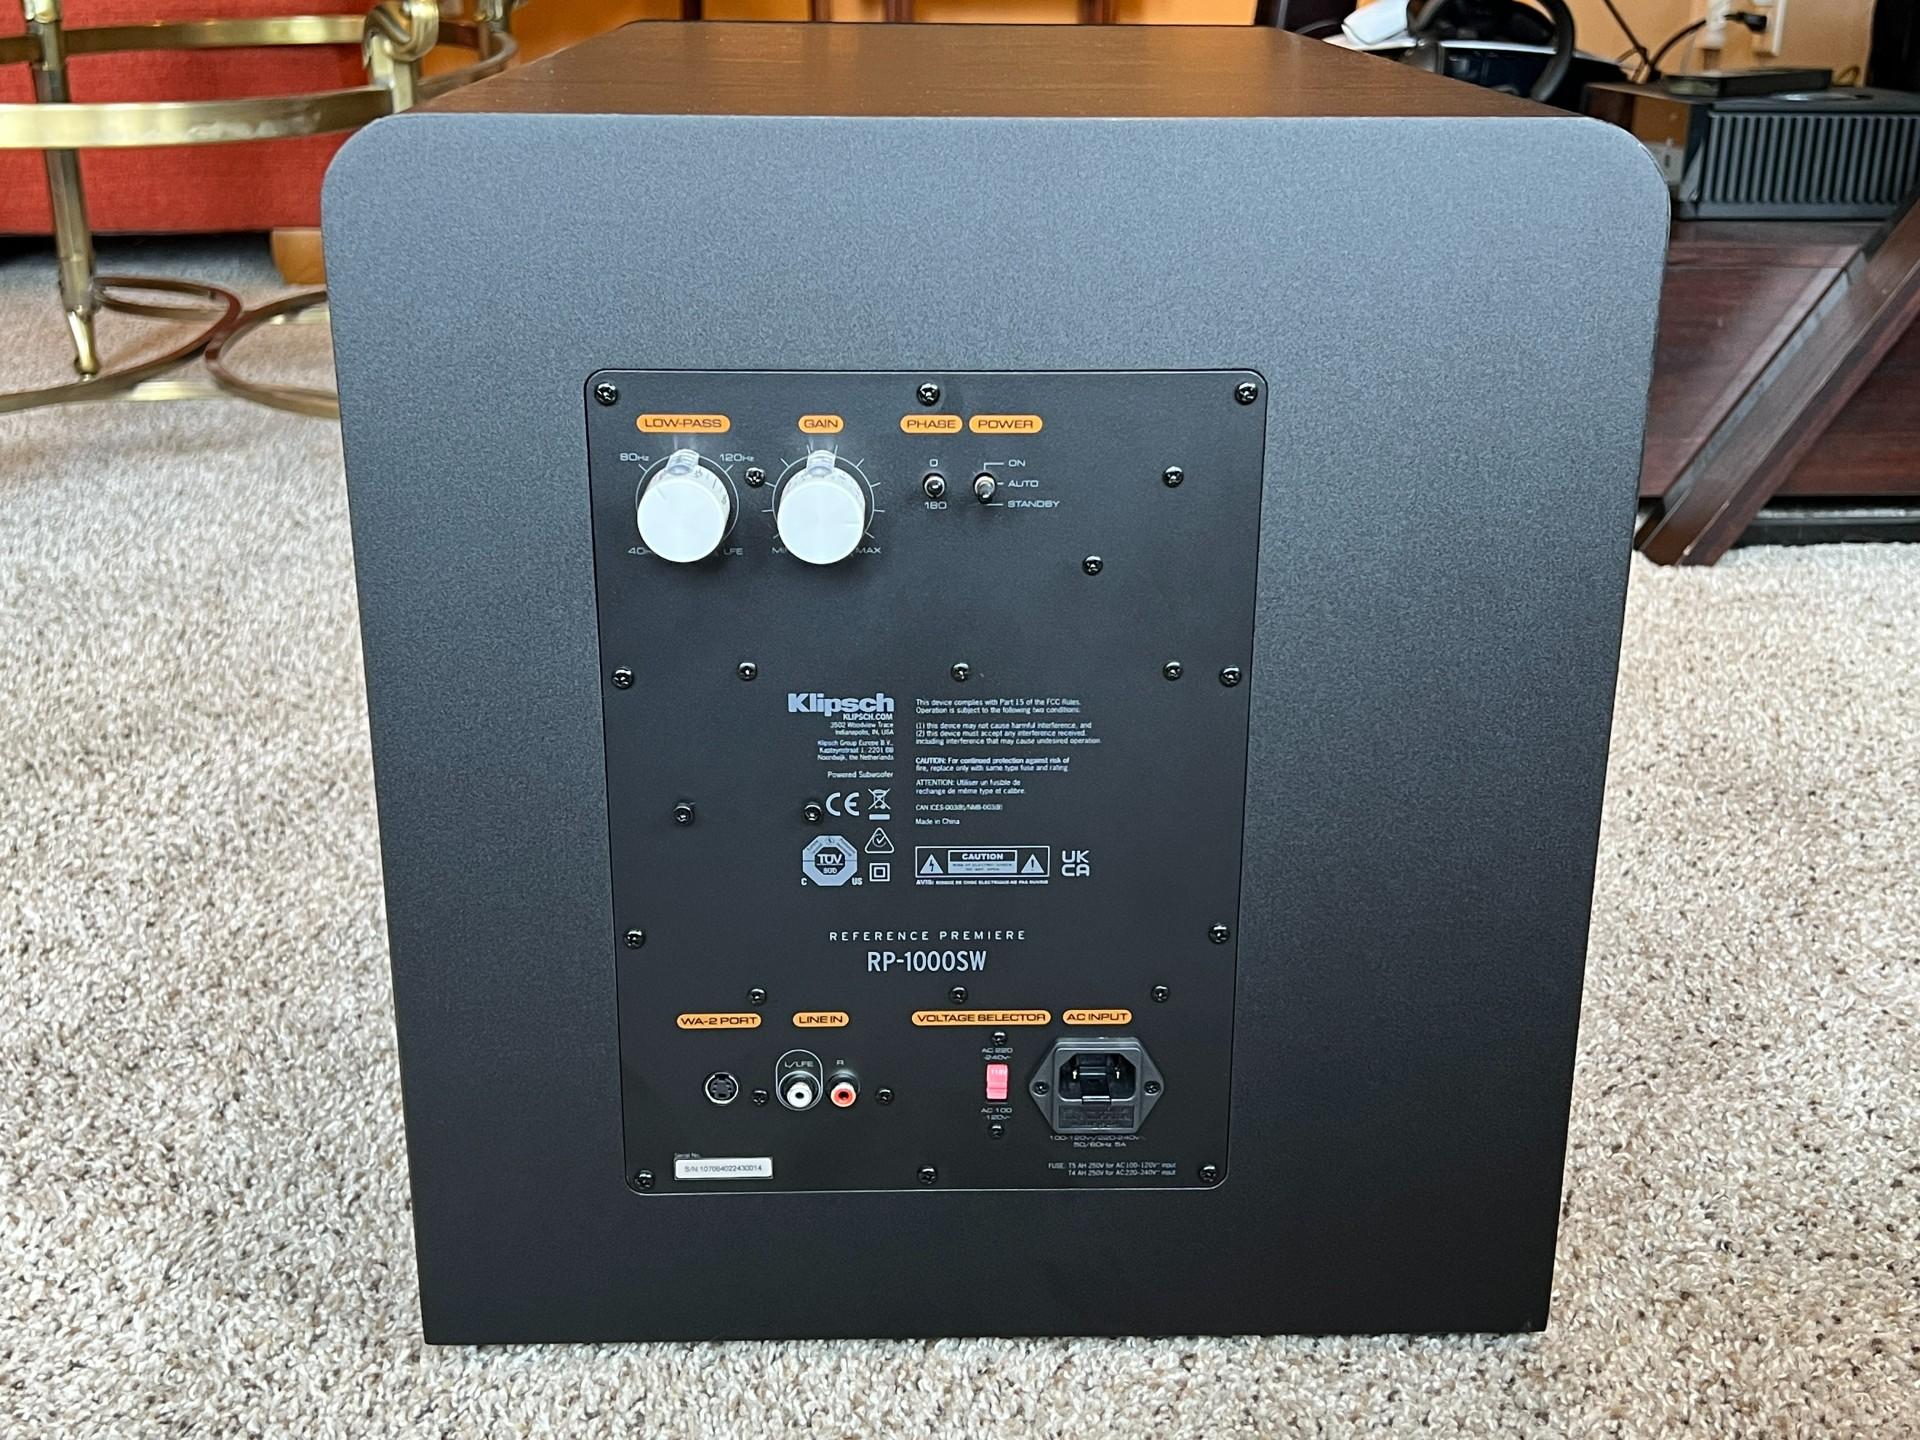 Klipsch RP-SW1000 subwoofer back panel with settings dials and ports.